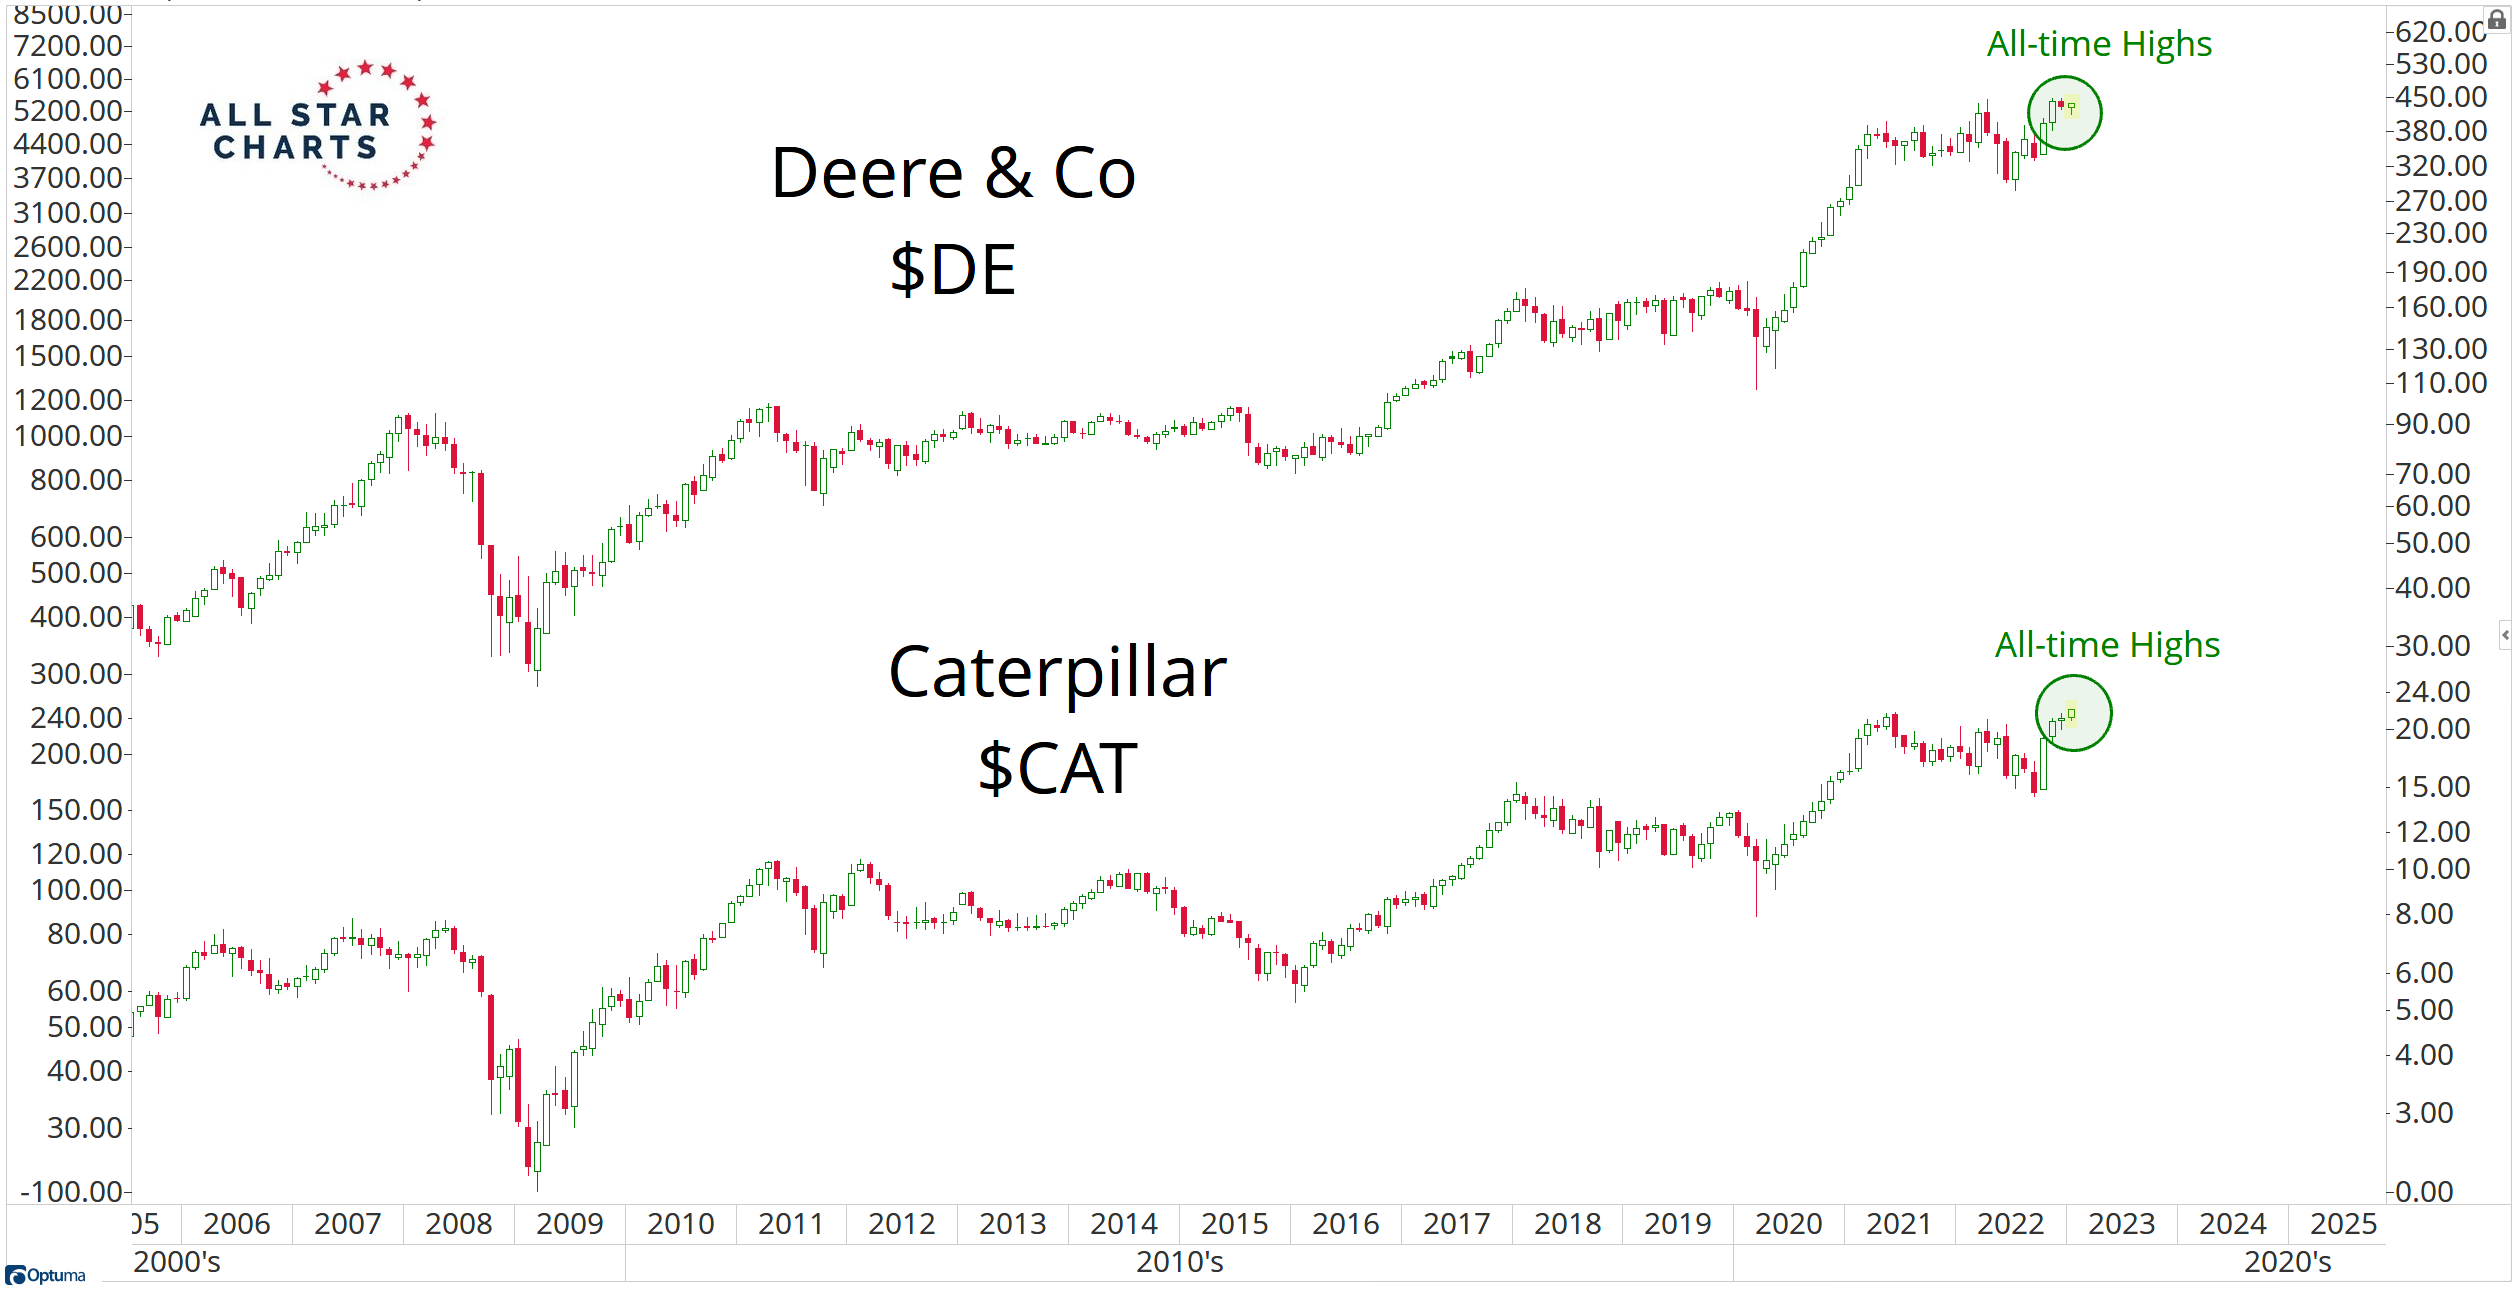 New all-time highs for industrial stocks Deere & Caterpillar